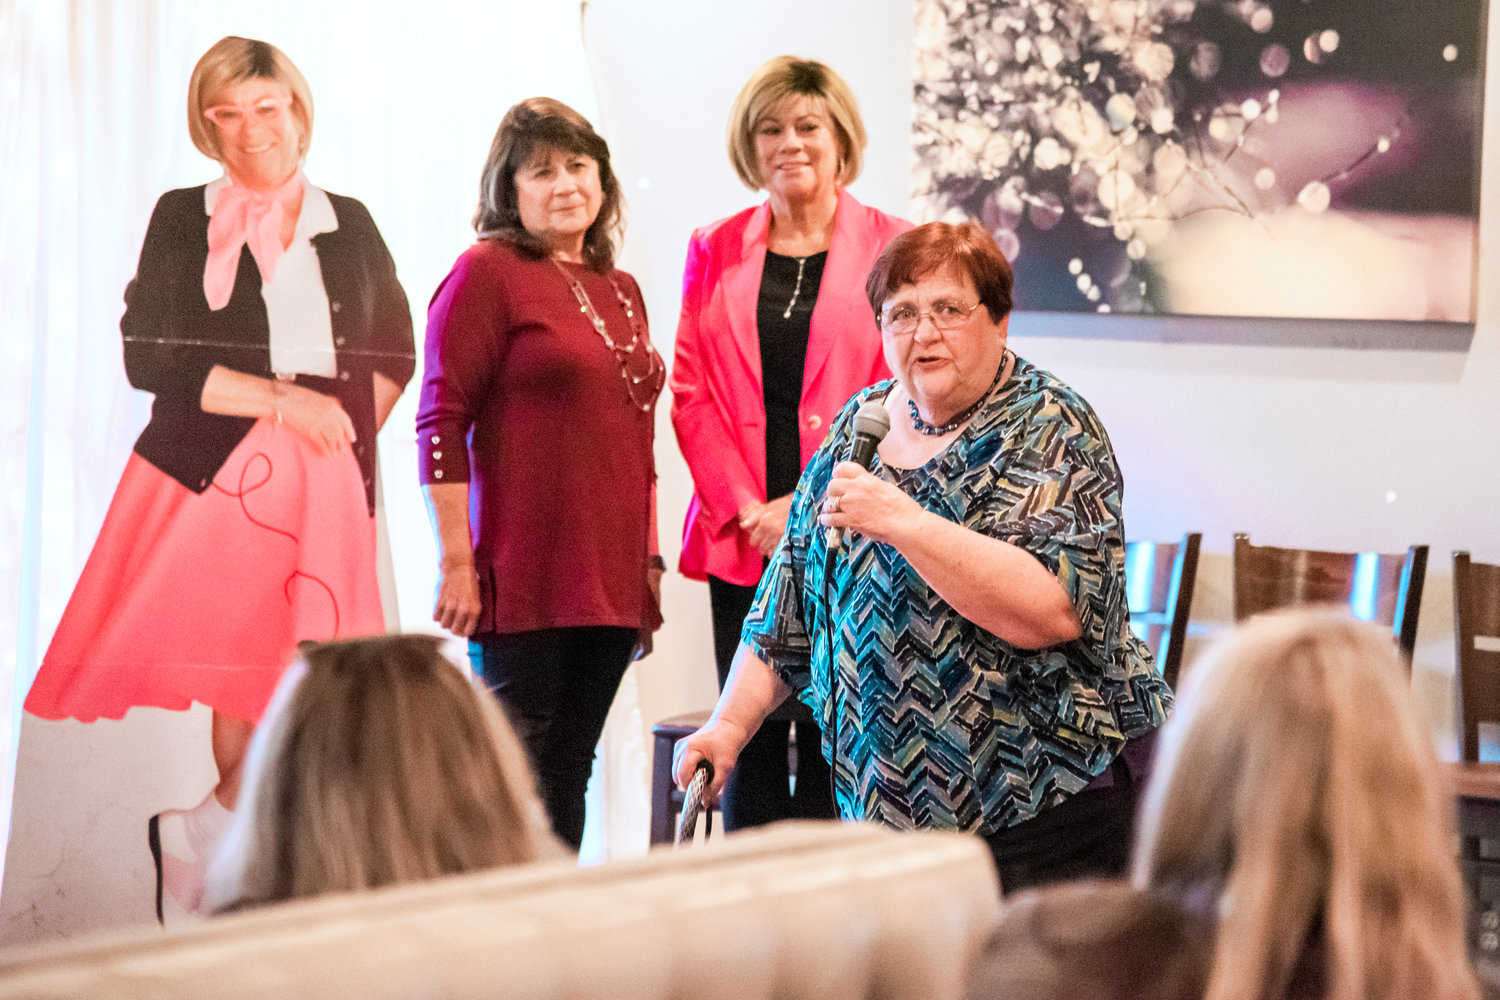 Donna Olson and Debbie Campbell look on as Doris Wood-Brumsickle talks about her time working with Campbell on the board during a retirement party held in Chehalis on Friday.